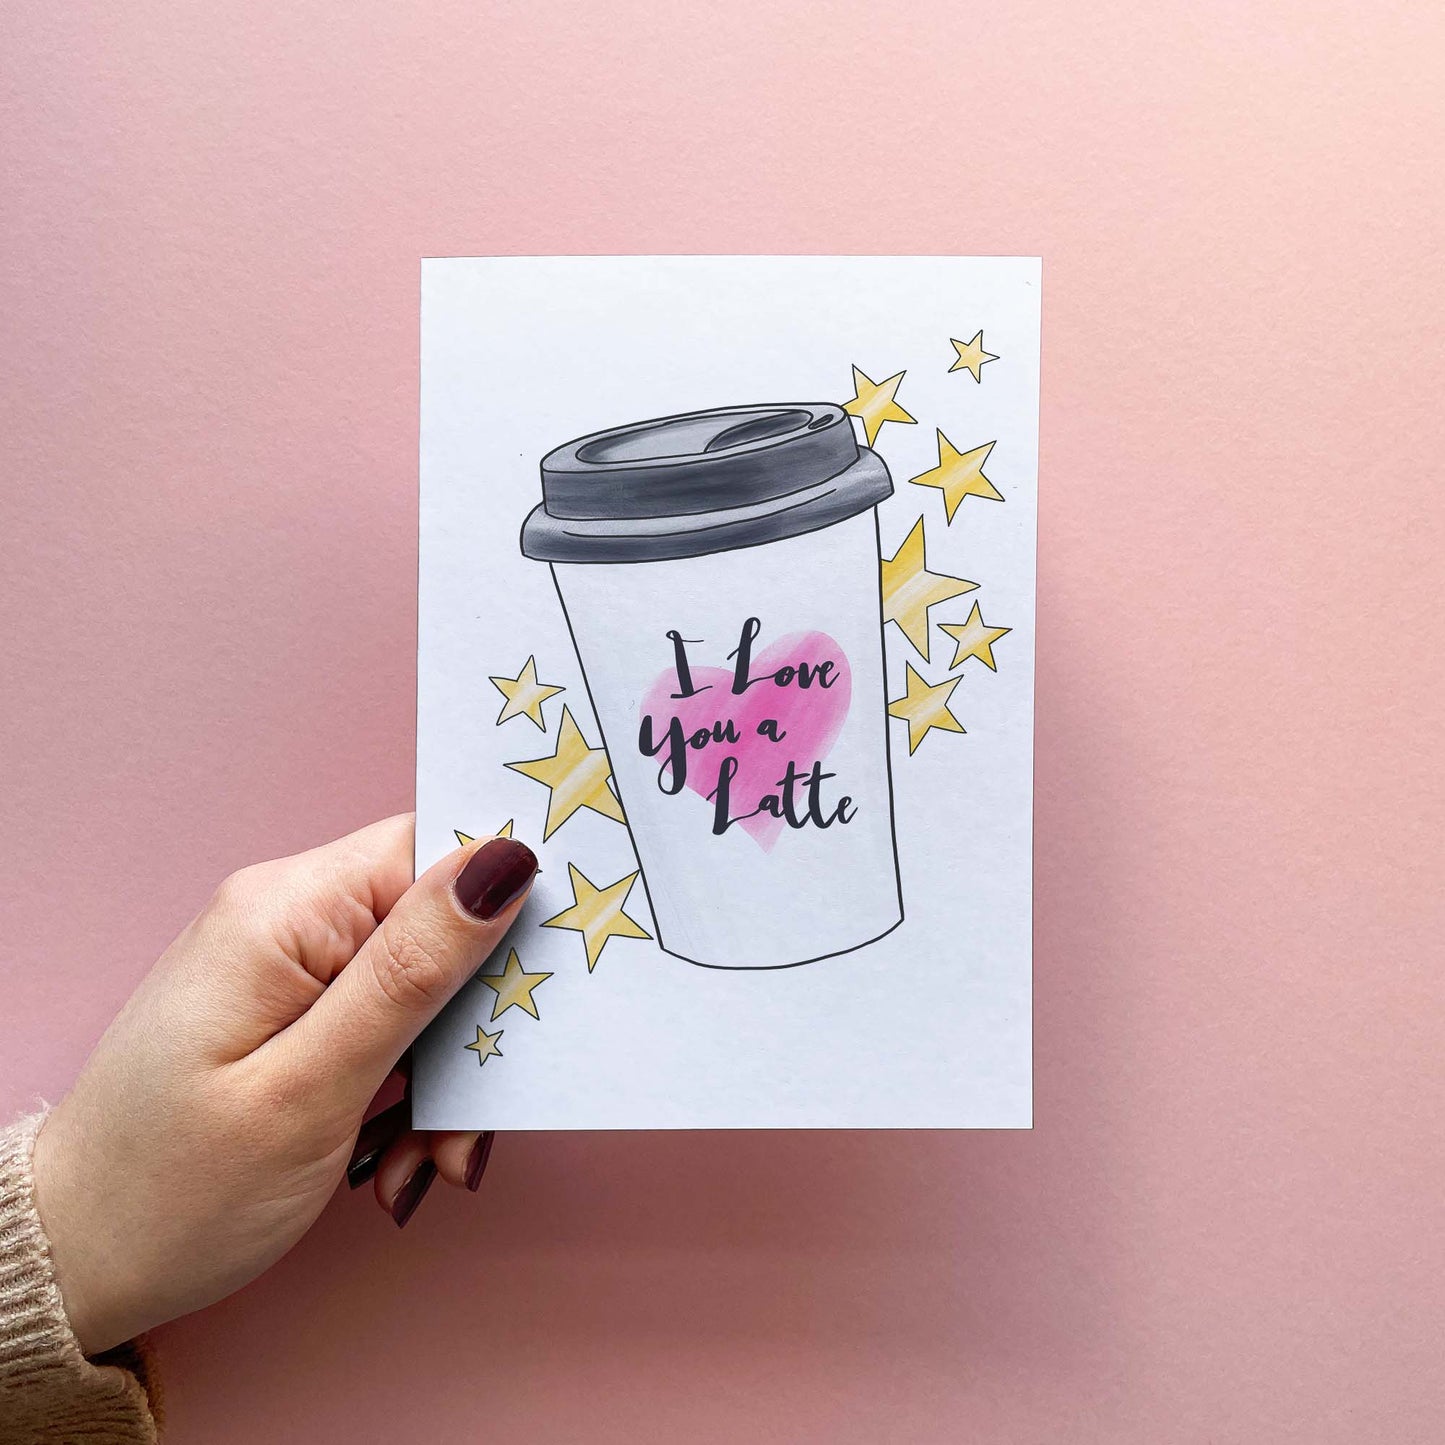 I Love You A Latte - Funny Valentine's Day Card